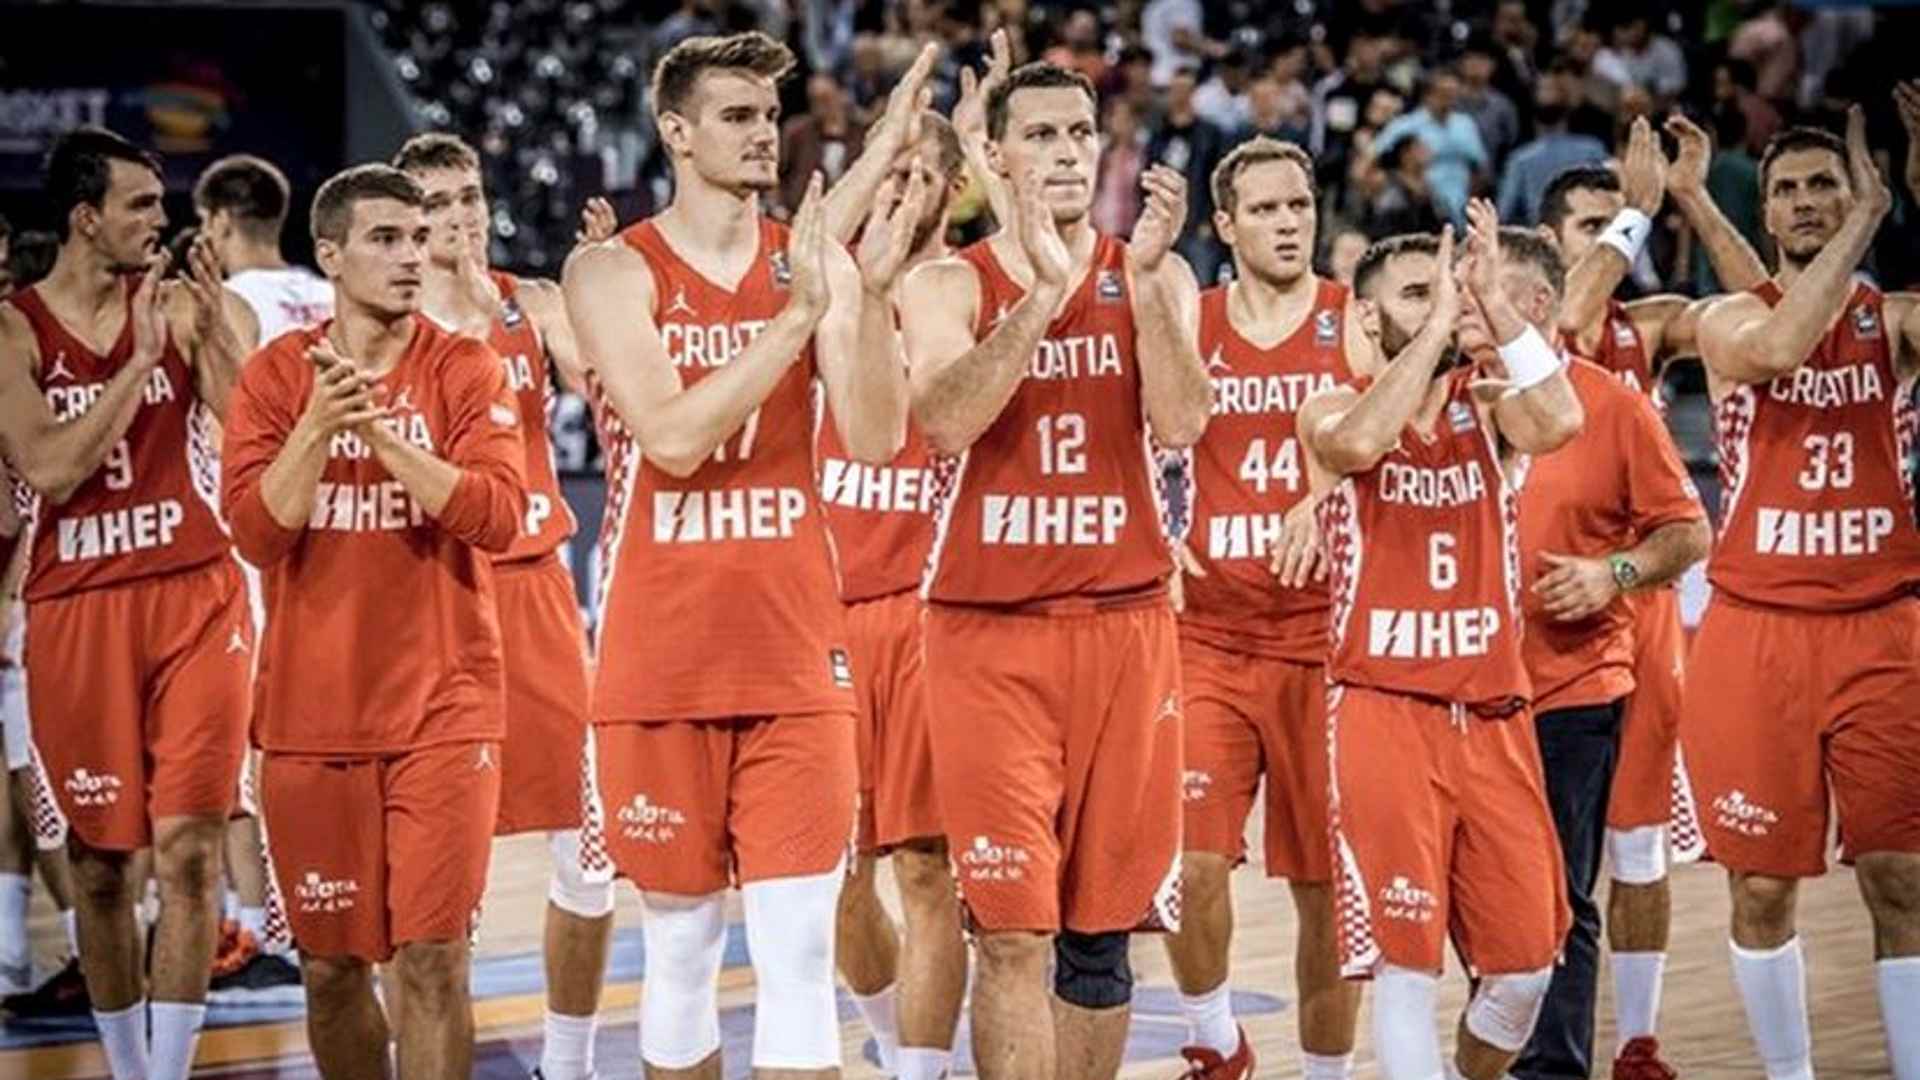 The EuroBasket 2022 Group C match between Croatia vs Ukraine will be held at Forum di Assago on September 8 at 2:15 PM (International time), and 5:45 PM (Indian time).